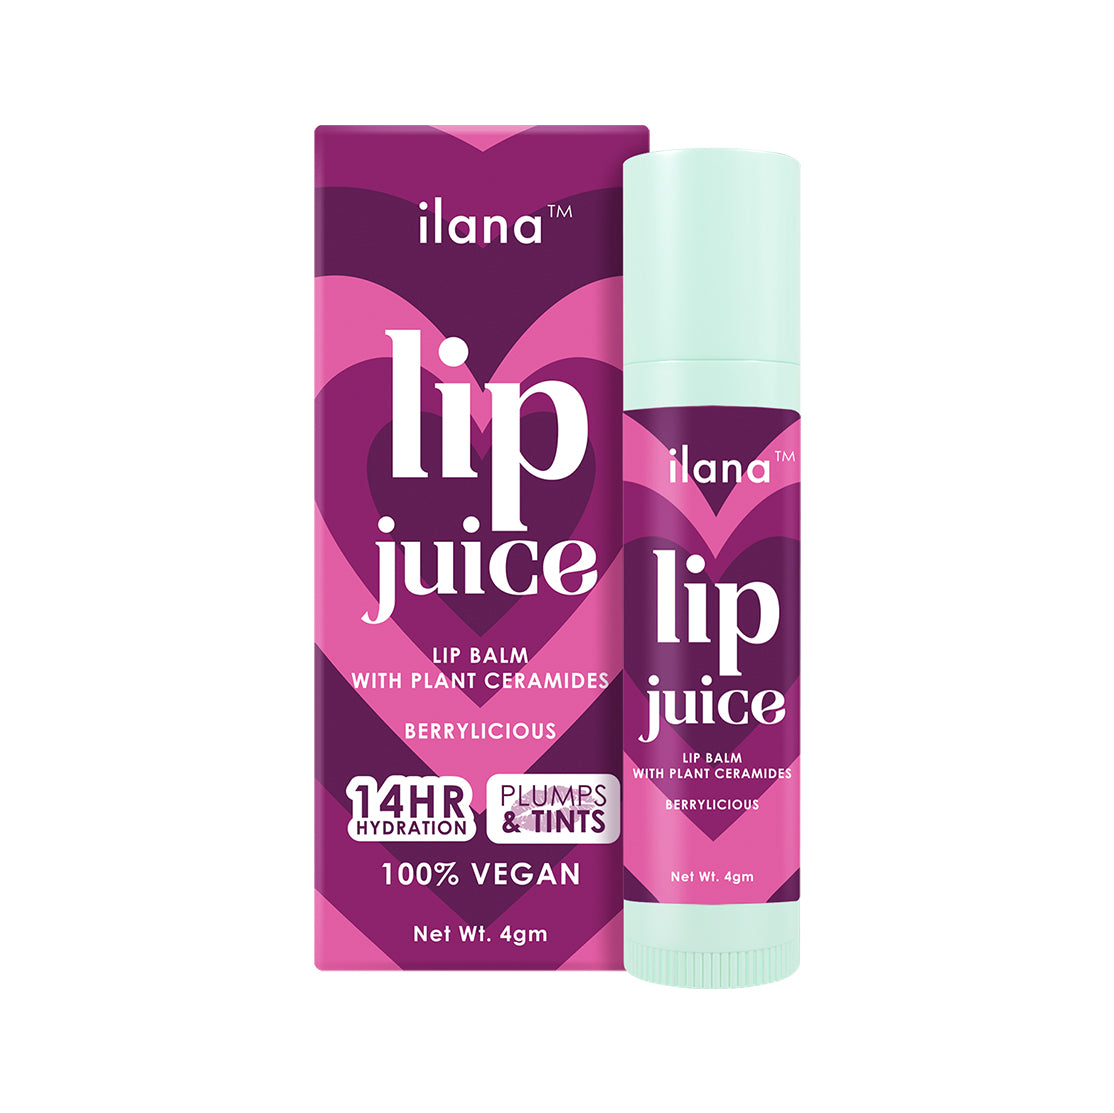 ilana - Lip Juice - Hydrating and plumping vegan tinted lip balm with plant ceramides - 14 hr hydration - Berrylicious - 4gm